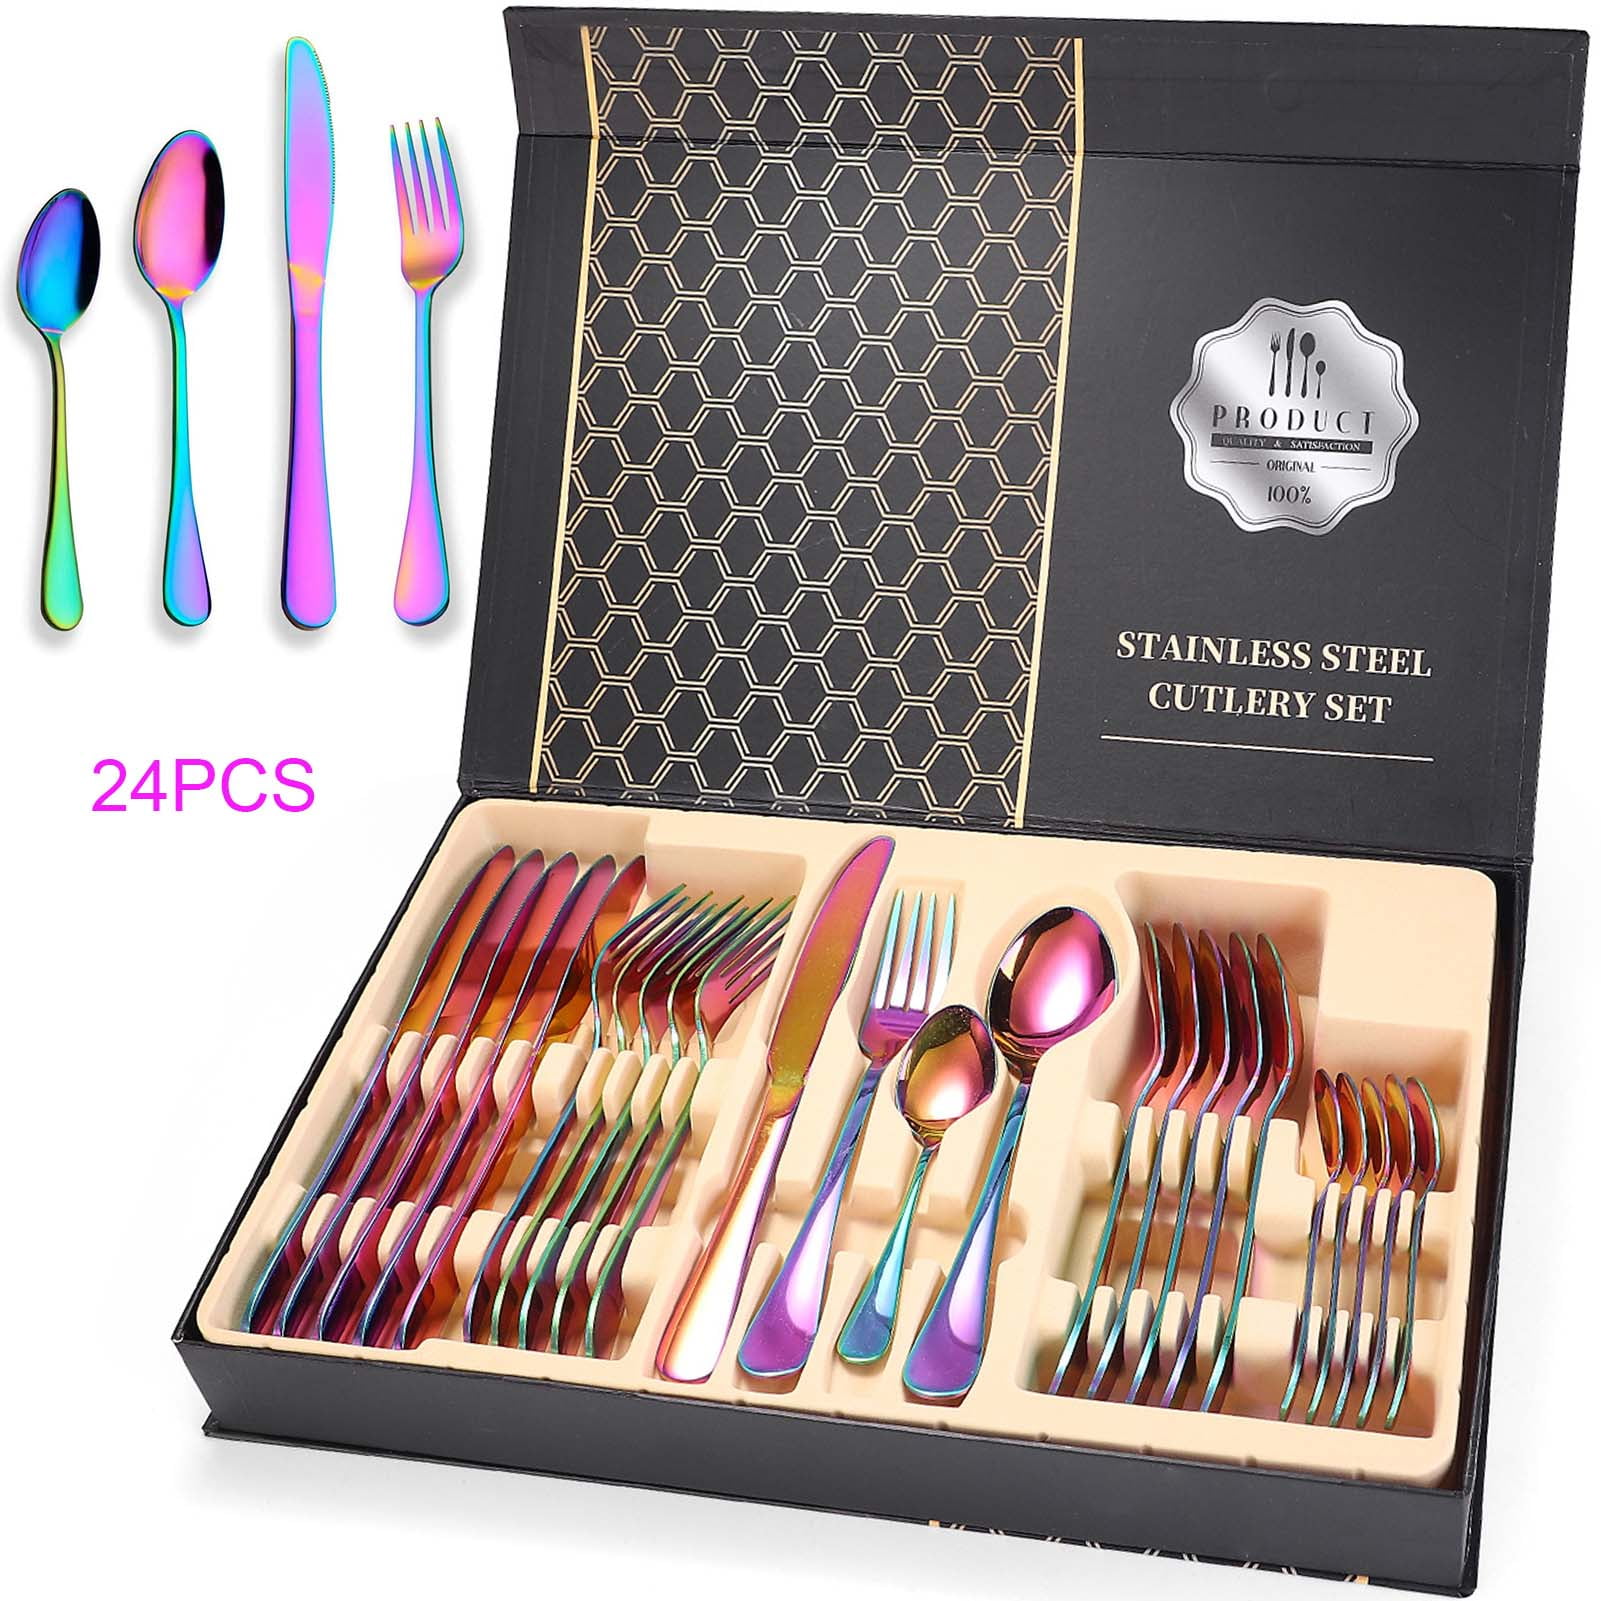 72 PCs Stainless Steel Cutlery Set with Case Dining Utensils Tableware Brand New 